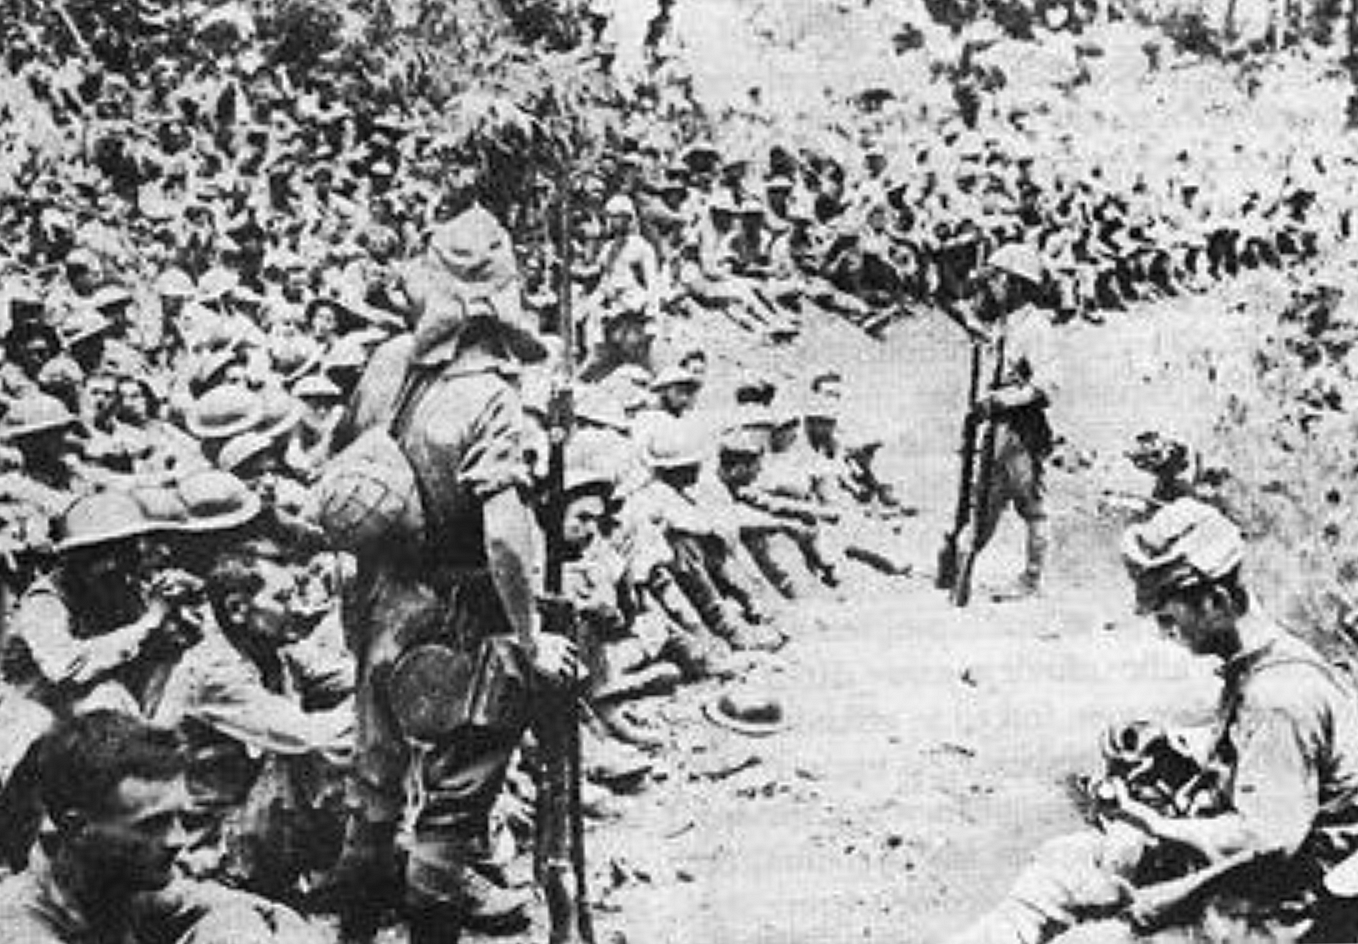 The Bataan Death March That Killed Thousands